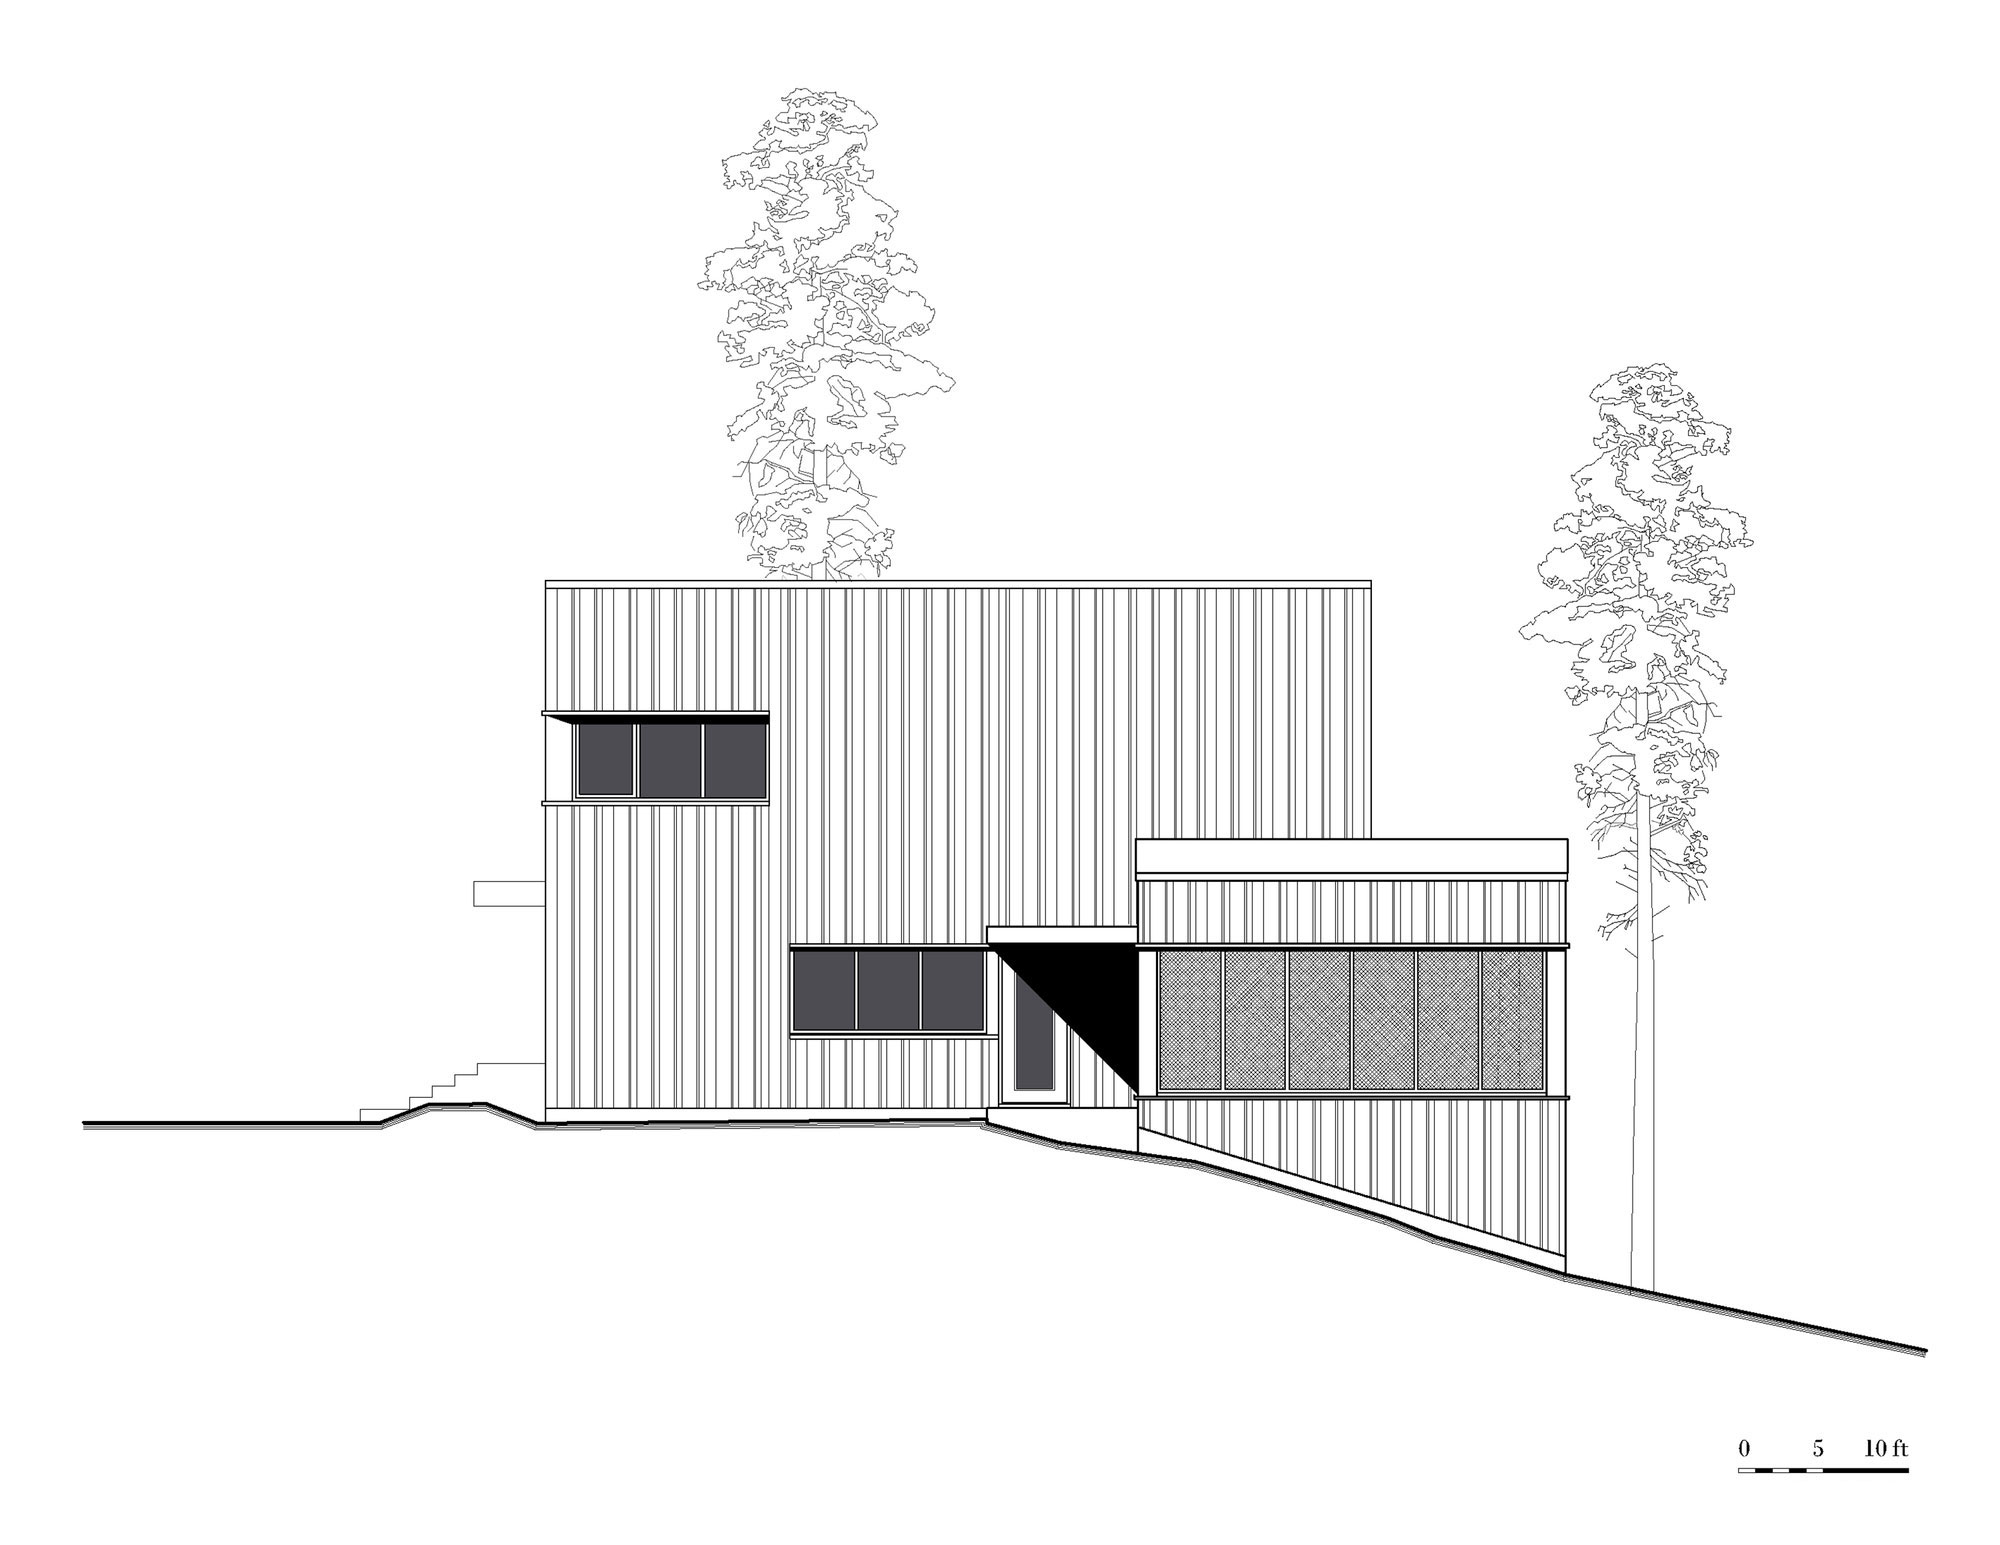 Lombok Architect - Light-Filled-House-in-the-Forest Plans 3